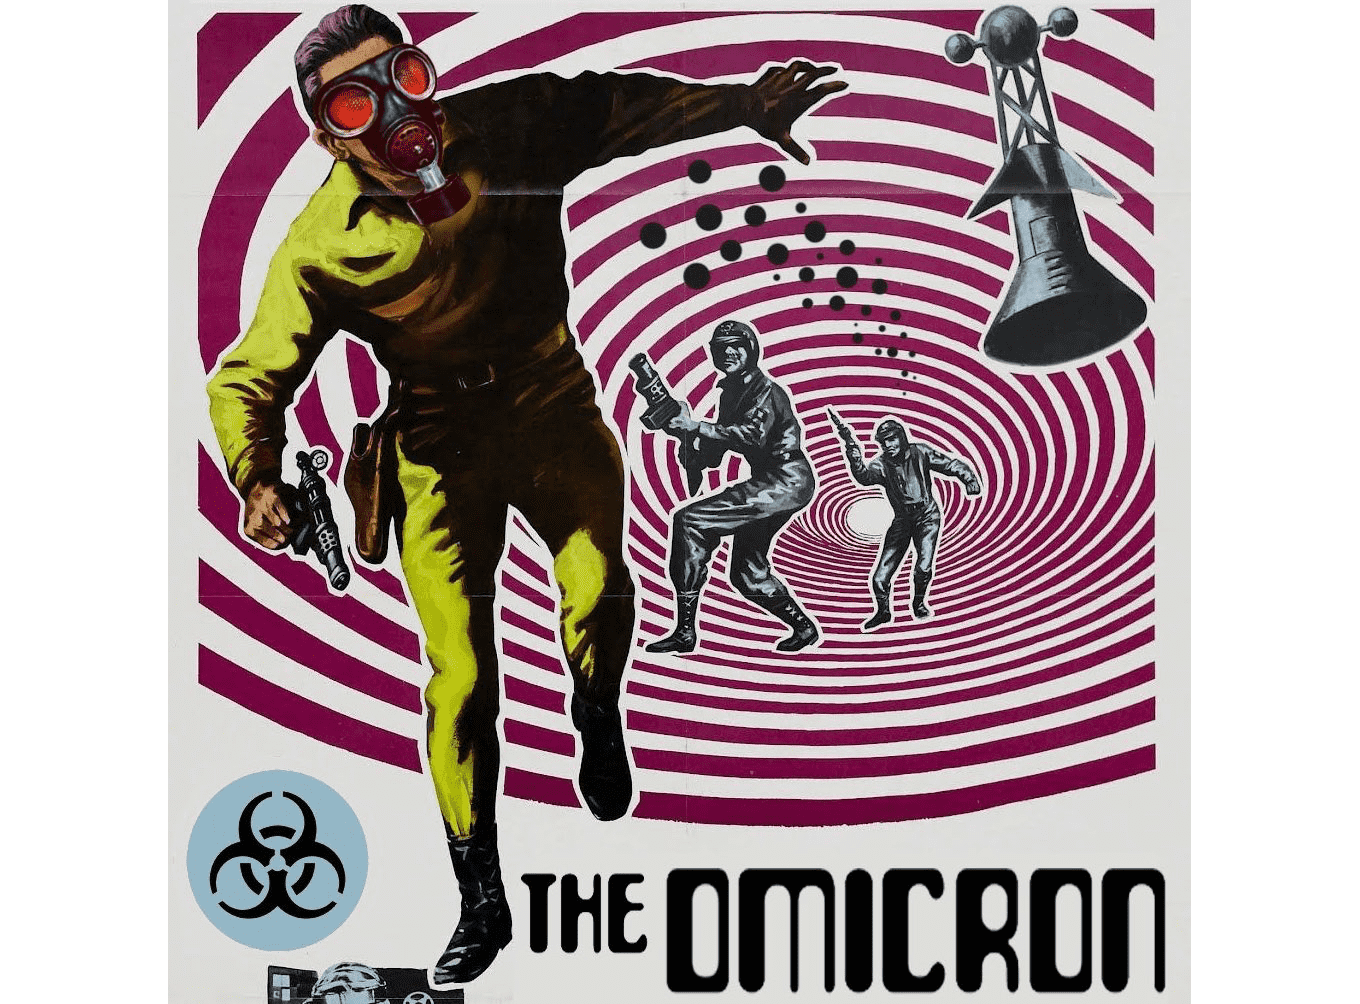 The Omicron Variant sounds like a 60’s sci-fi movie